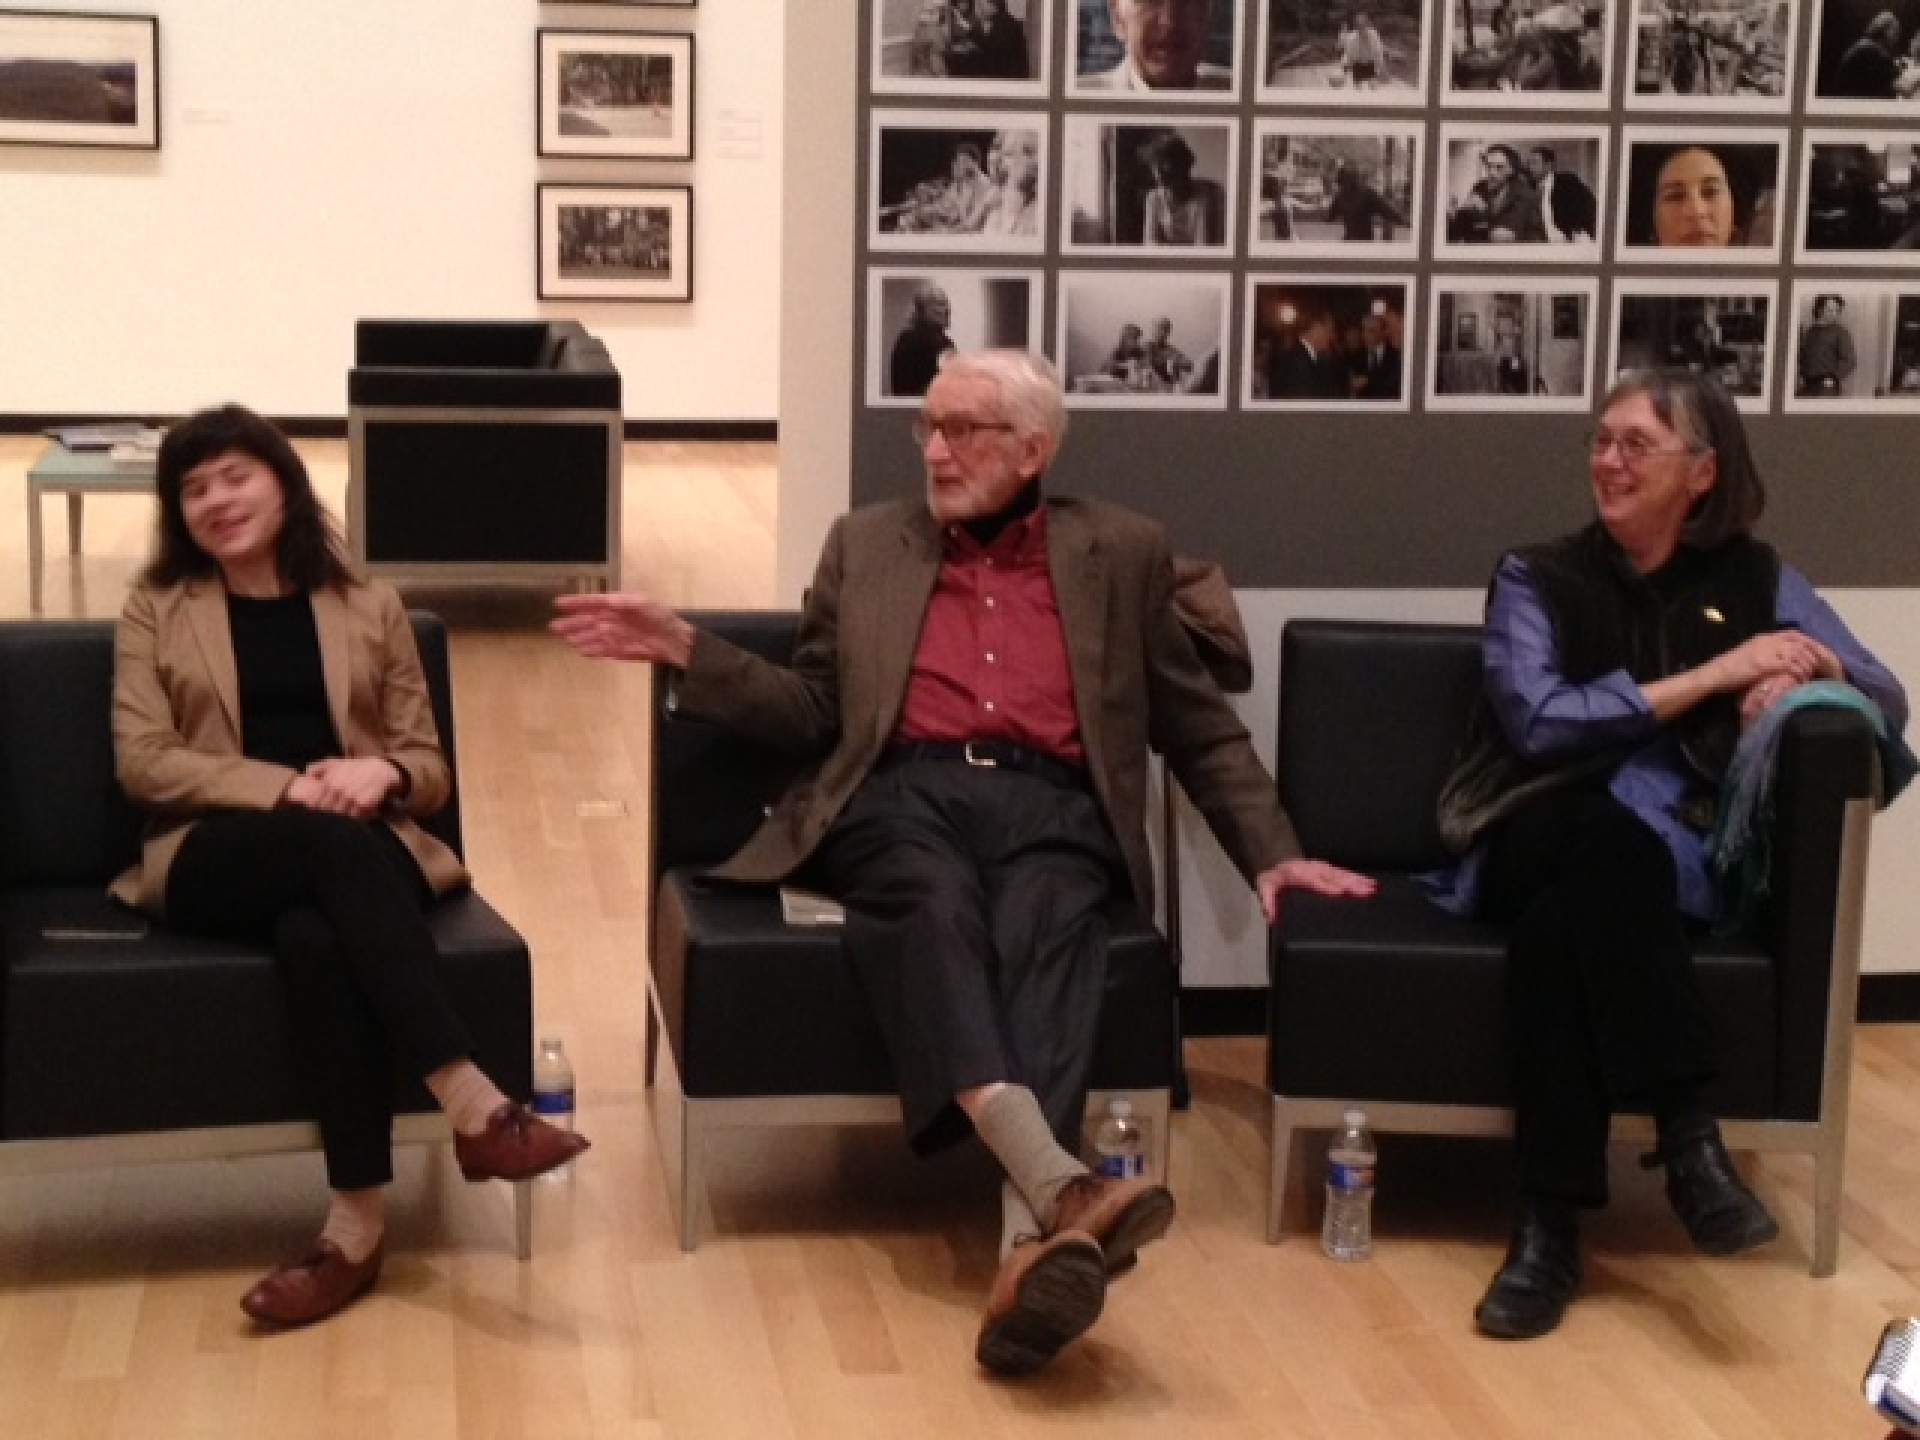 Community Watercolor Roundtable panelist from left to right, Rebecca Pollak, Joesph Whalen, and Judith Walsh